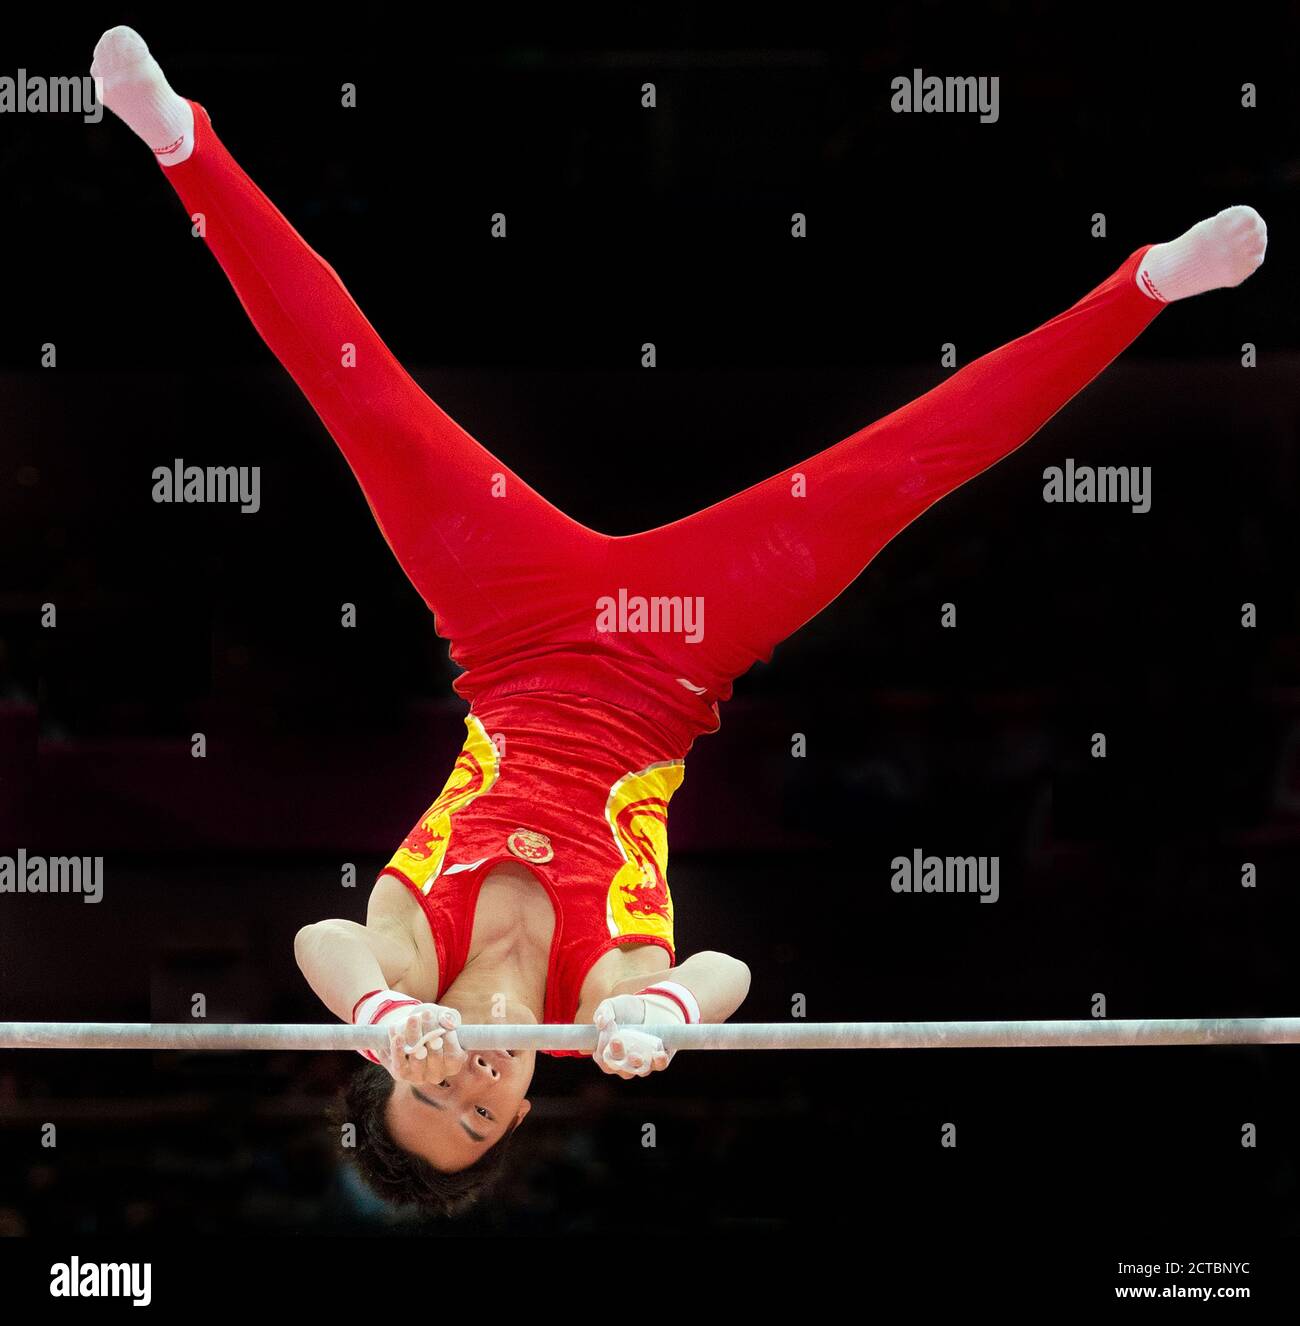 MENS HORIZONTAL BAR FINAL LONDRES 2012 OLYMPICS NORTH GREENWICH ARENA Copyright image : Mark pain / Alamy Banque D'Images